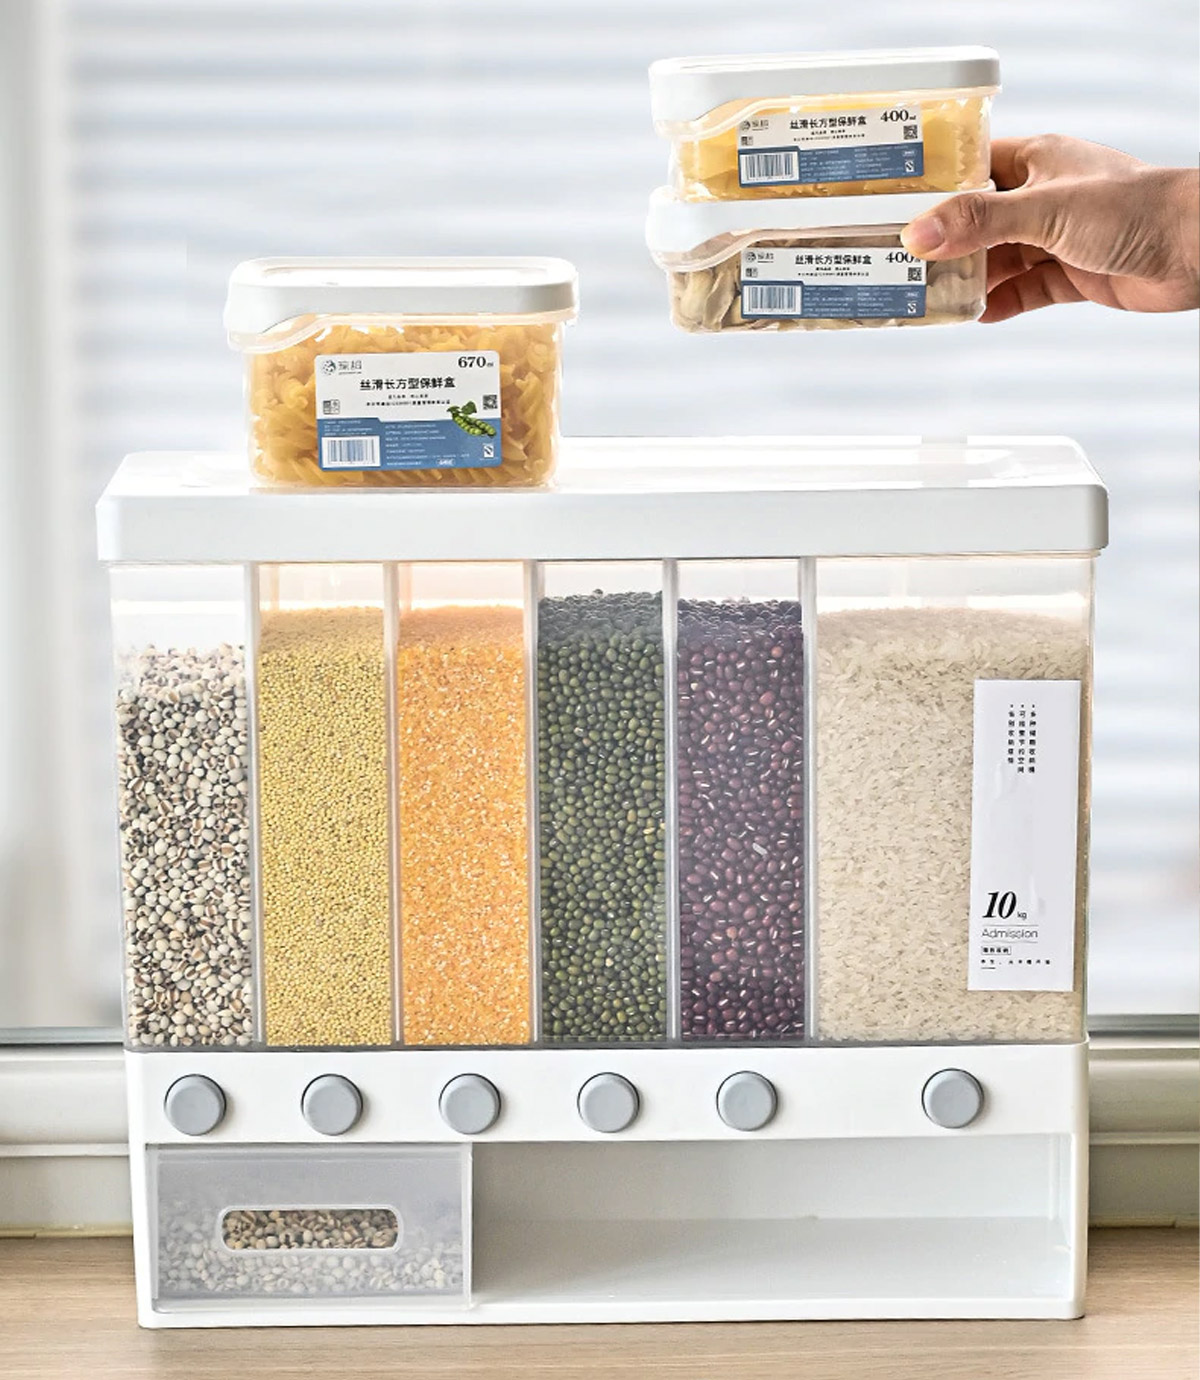 Transparent wall mounted food dispenser filled with multi-colored pulses and rice on a wooden surface